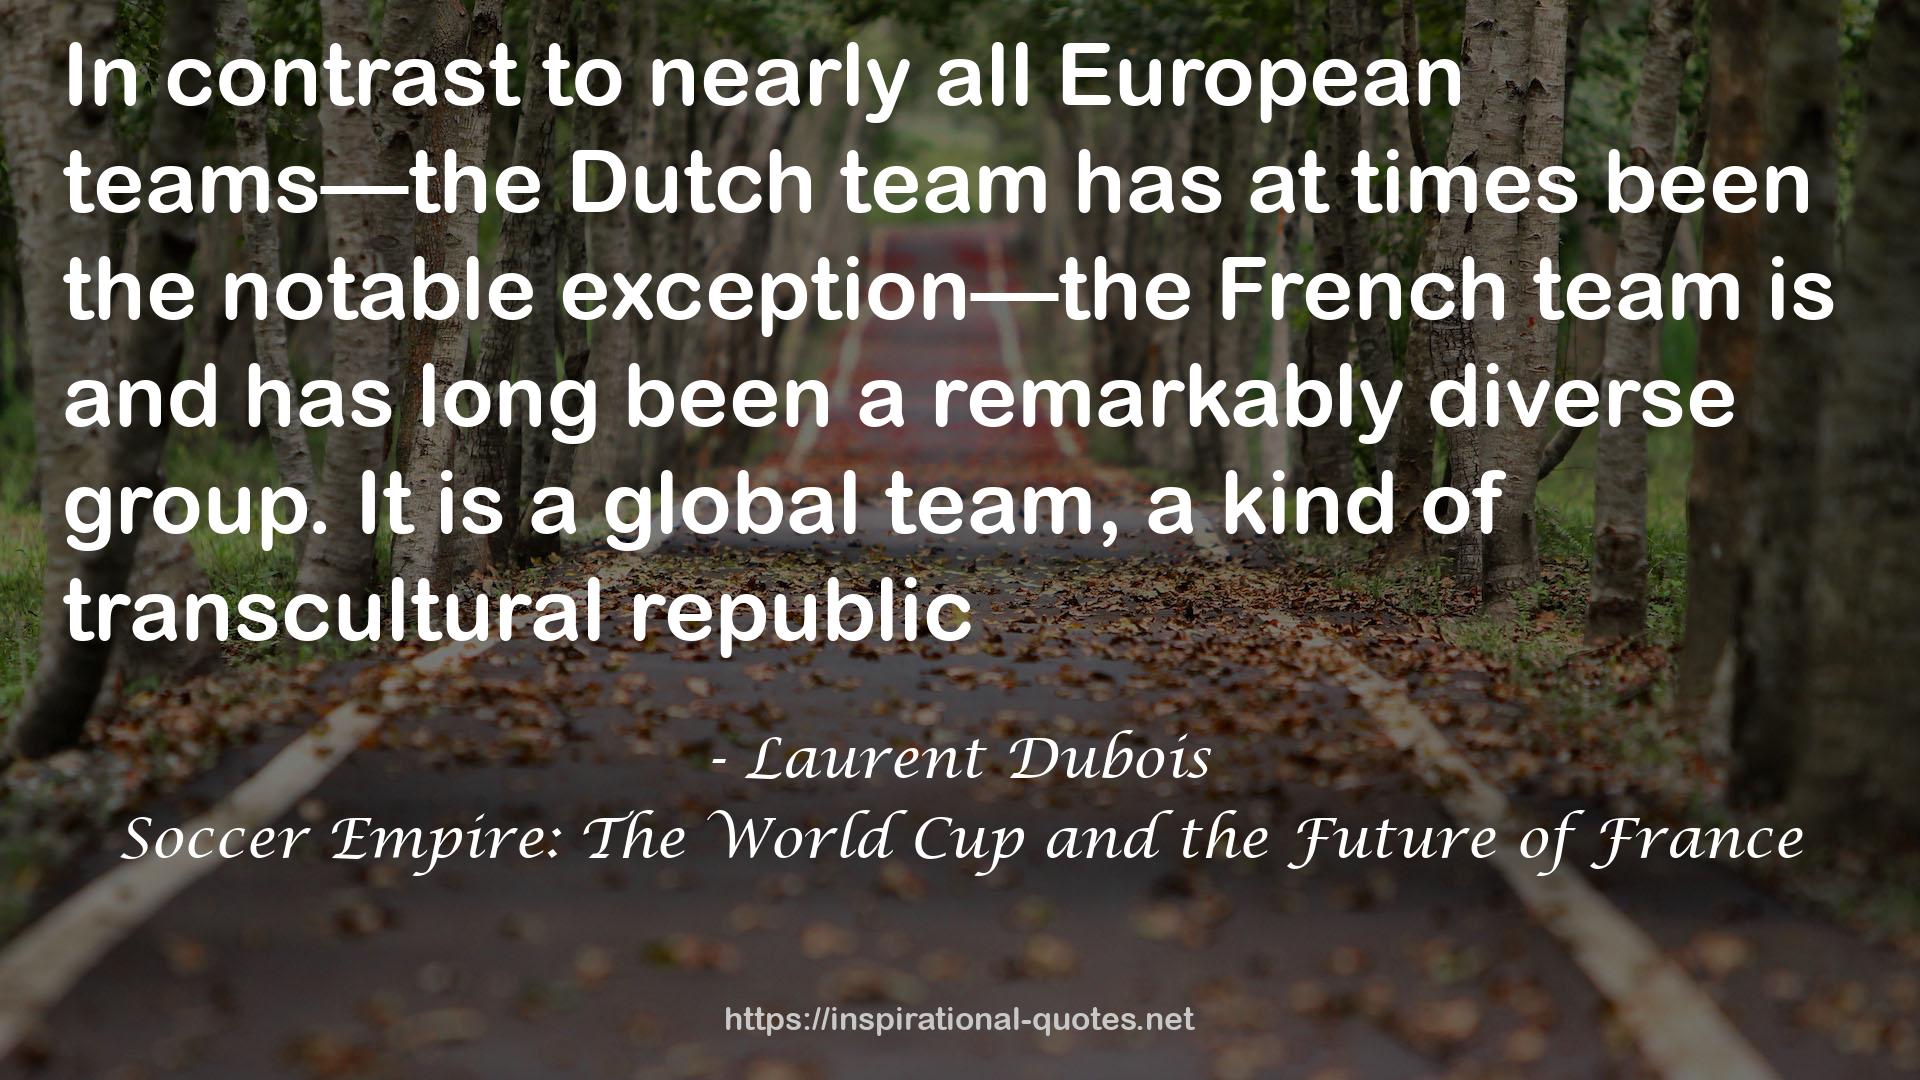 Soccer Empire: The World Cup and the Future of France QUOTES